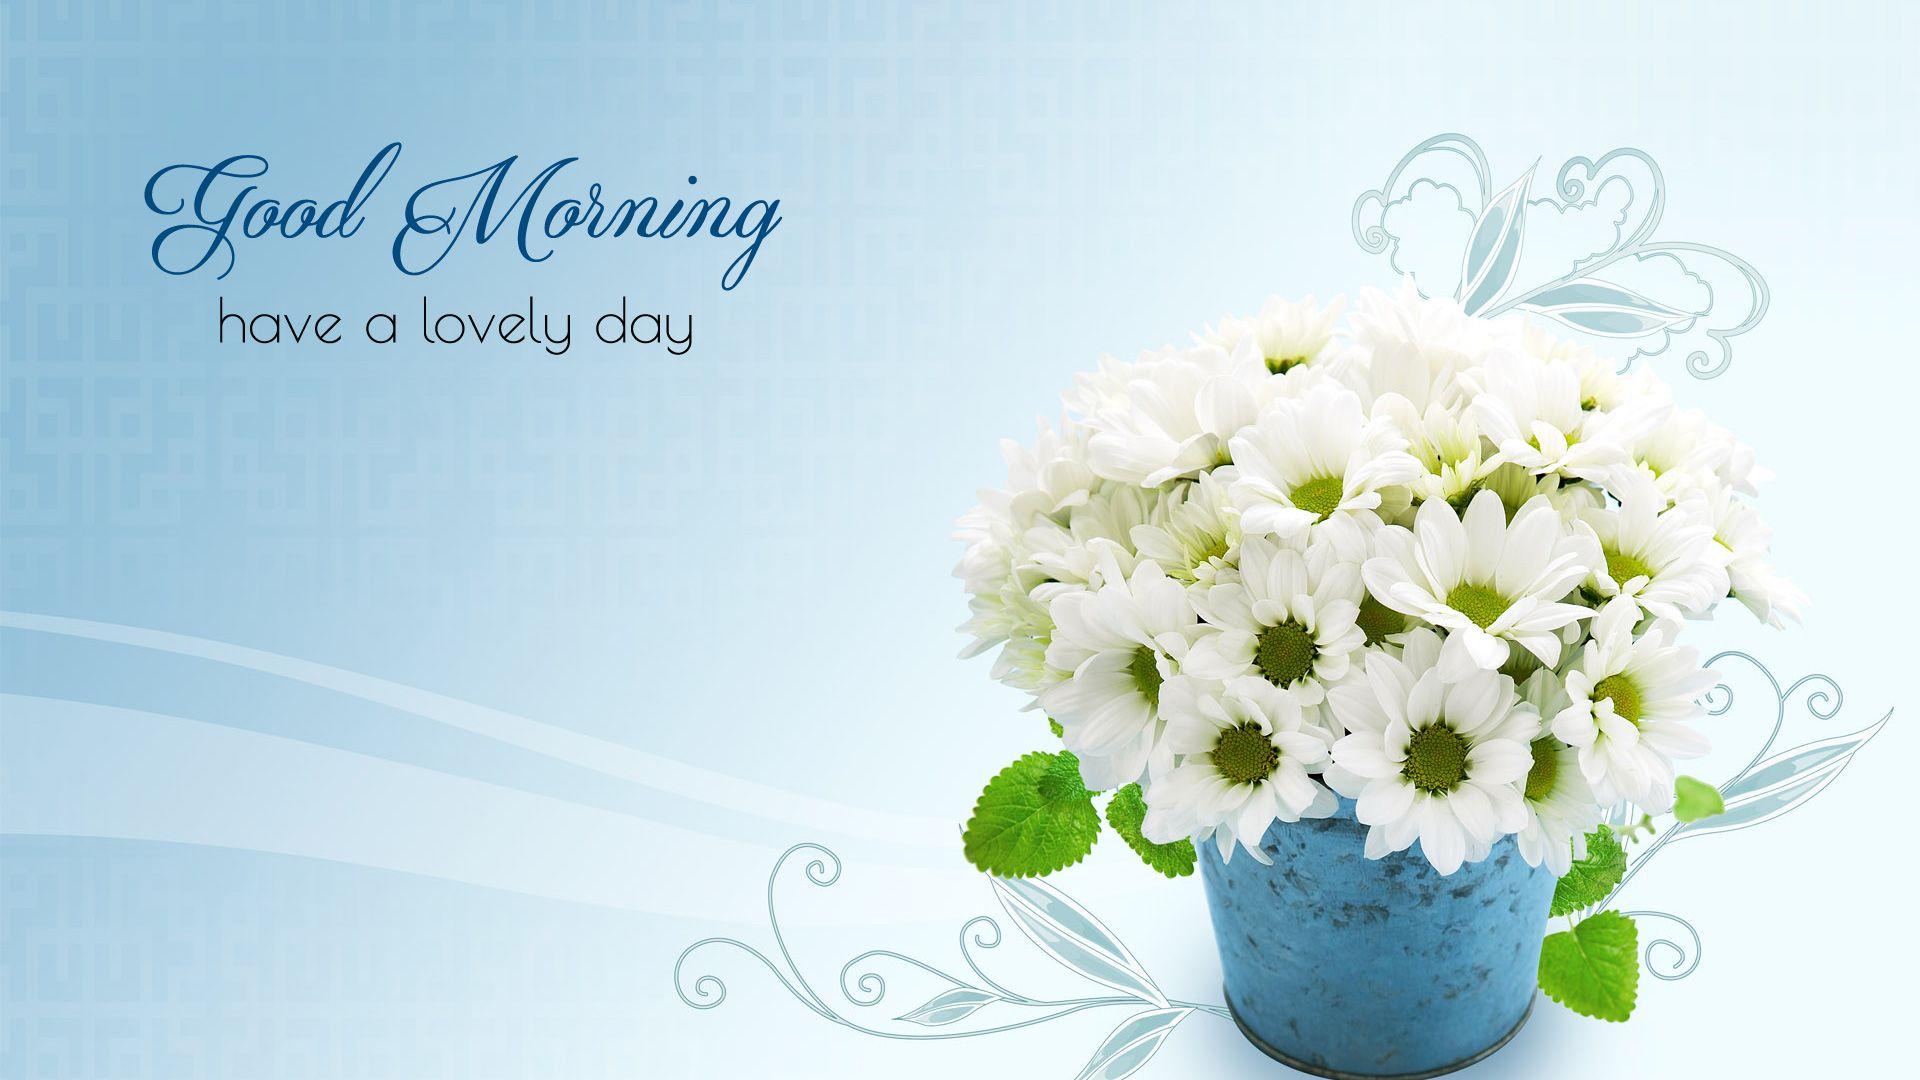 Good Morning Wallpapers with Flowers, Full HD 1920x1080 GM Image